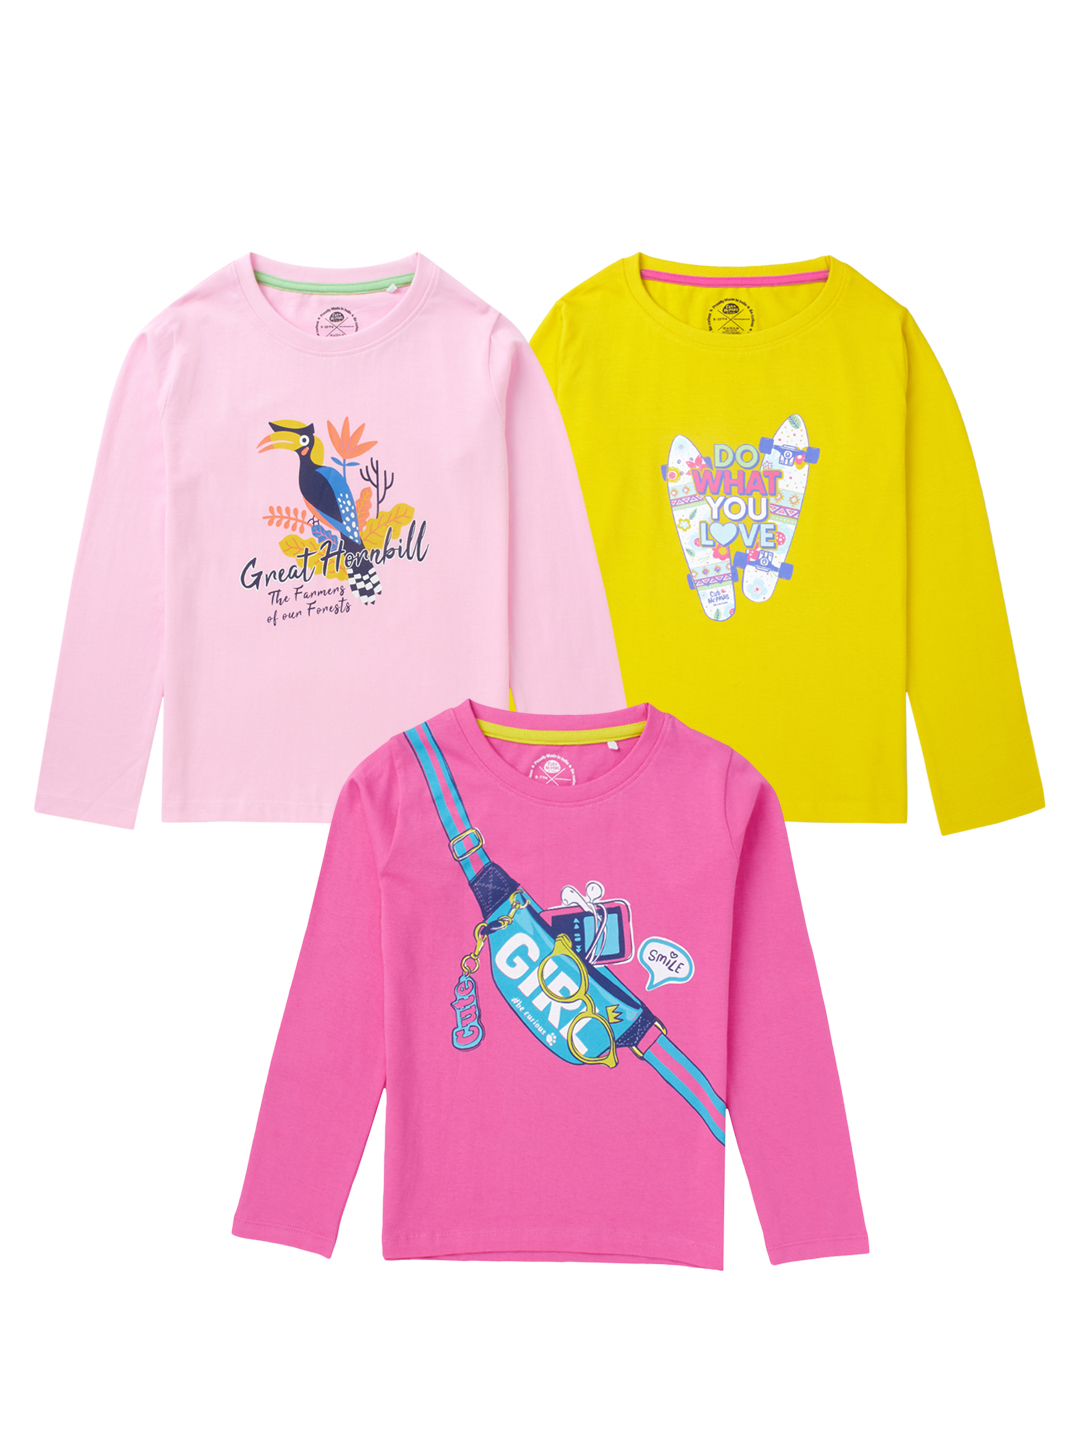 Girls Pack of 3 T-Shirts - Full Sleeves Multi Color